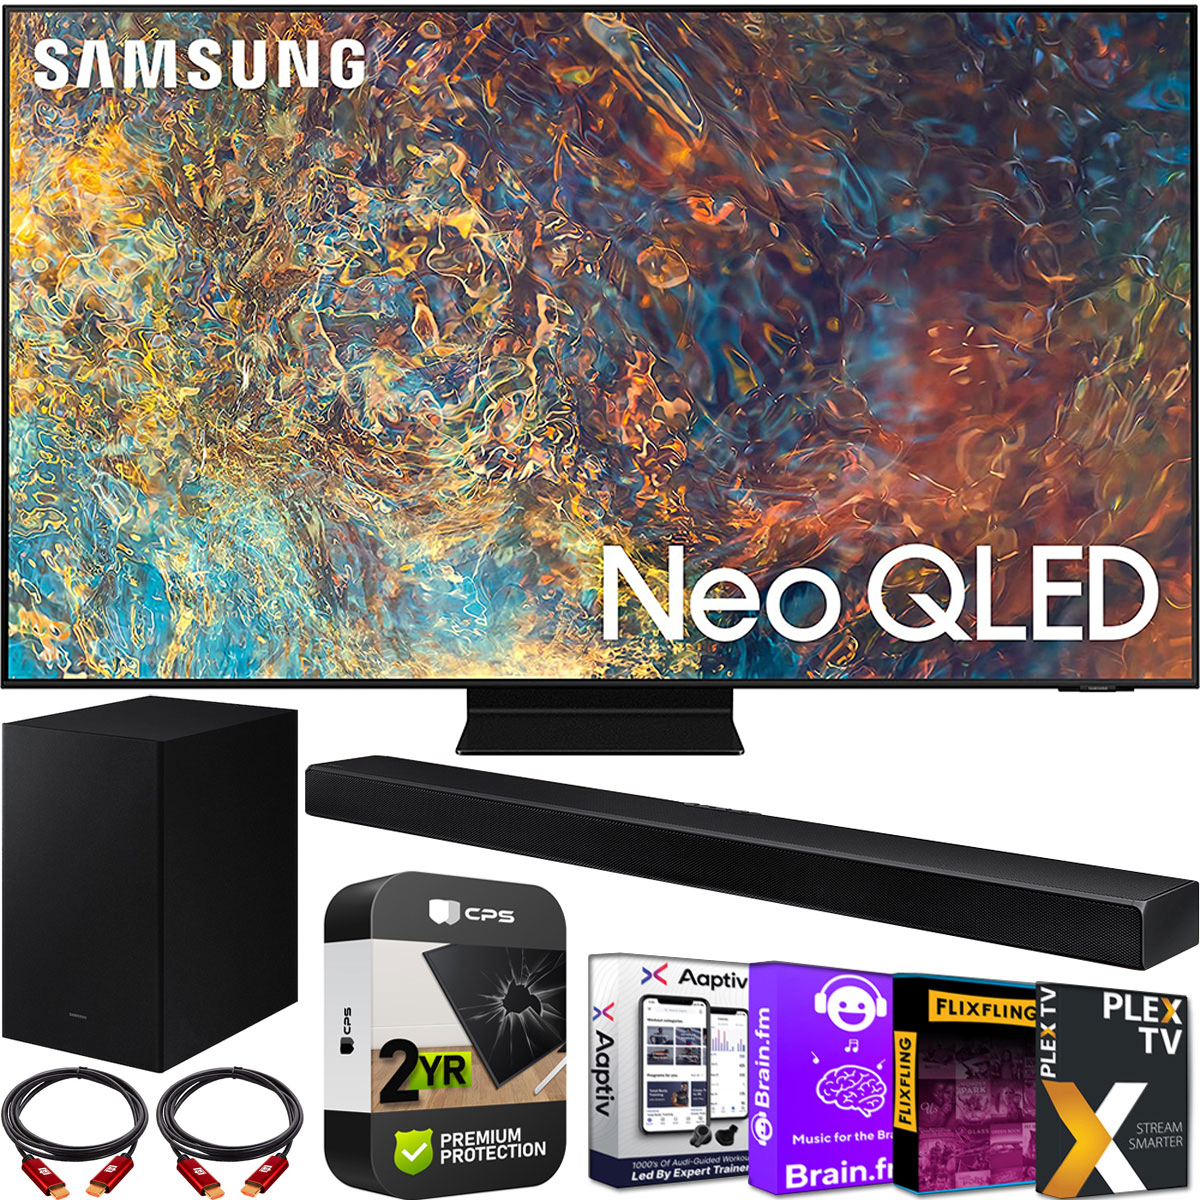 Samsung QN55QN90AA 55 Inch Neo QLED 4K Smart TV (2021) Bundle with HW-A650 3.1ch Soundbar and Subwoofer with Premium 2 Year Extended TV Protection Plan Kit Deco Gear 2 Pack HDMI Cables - image 1 of 2